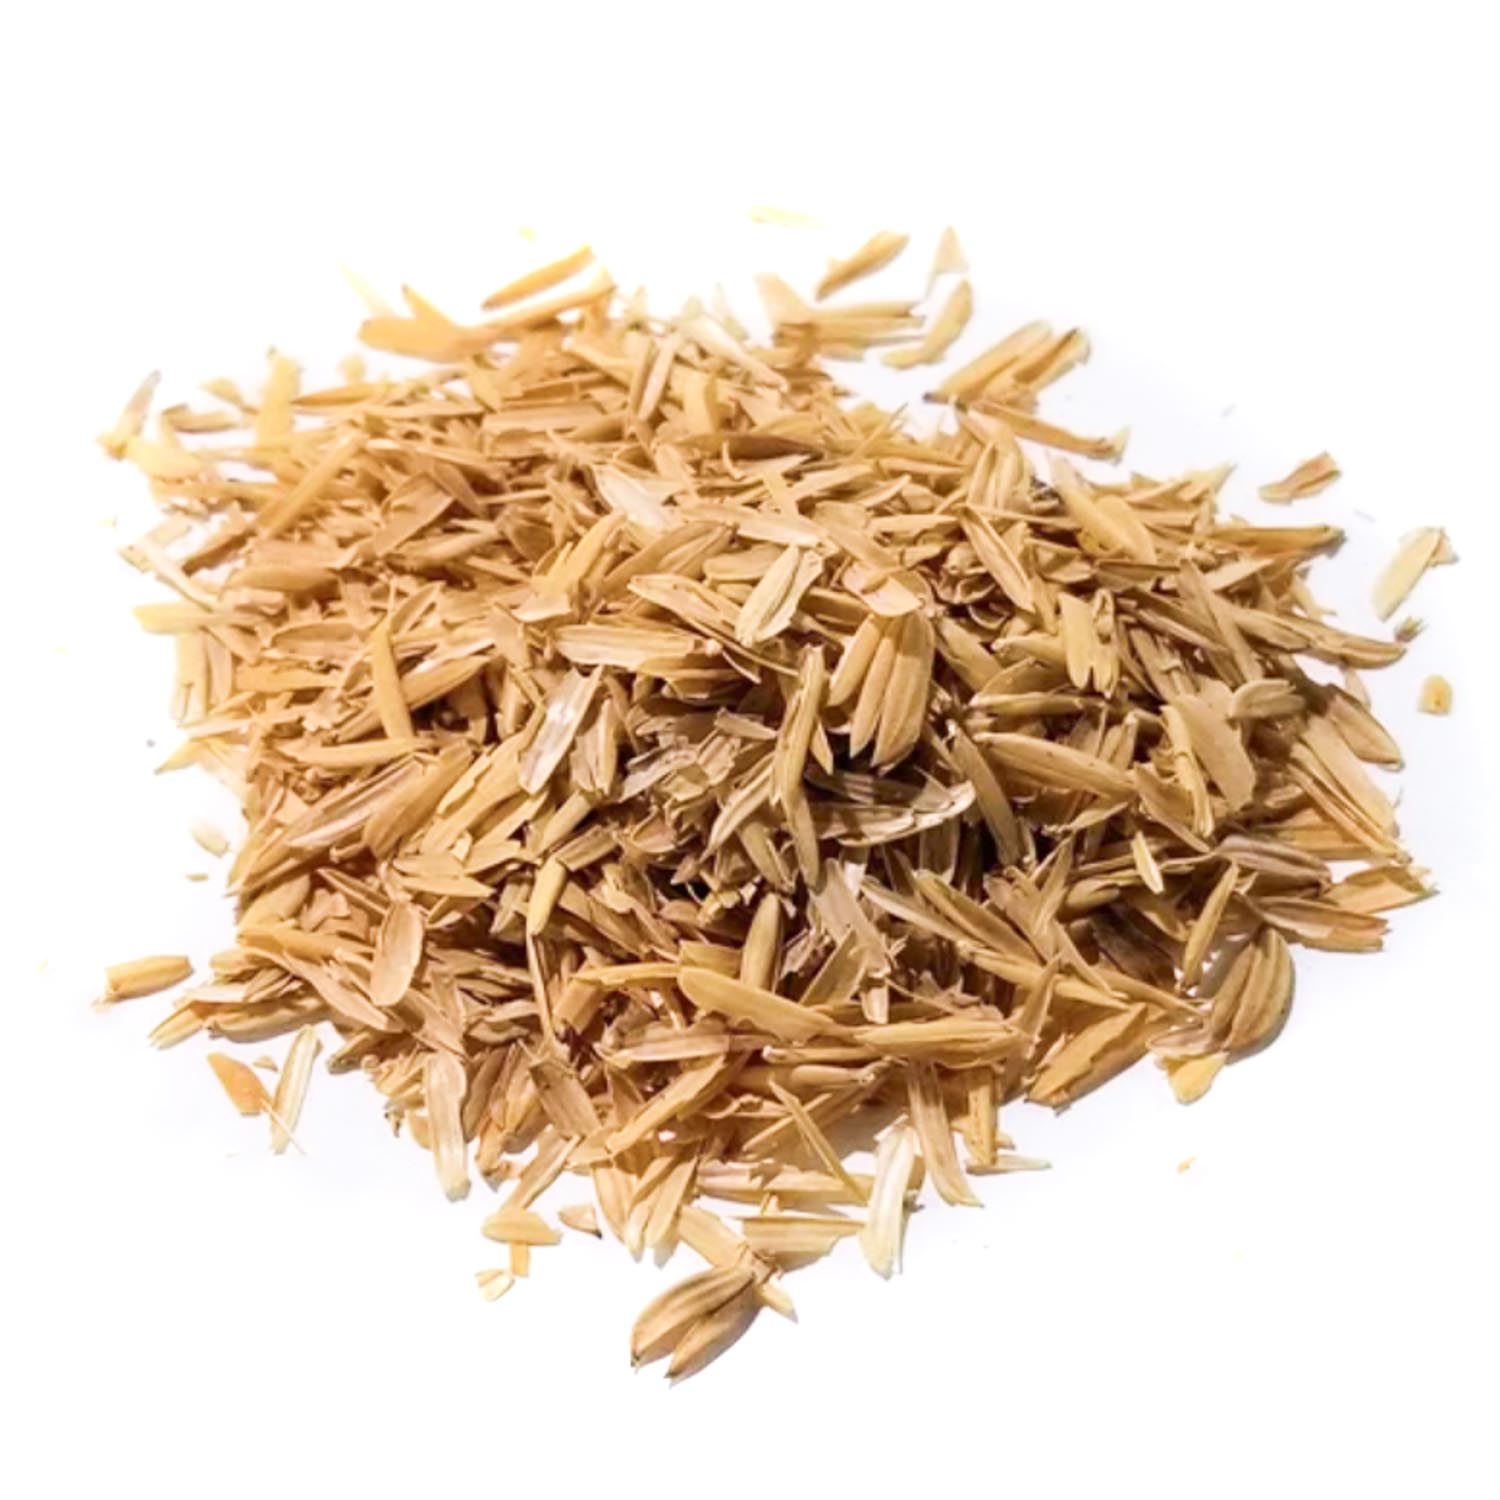 Product image for Rice Hulls - Riceland®